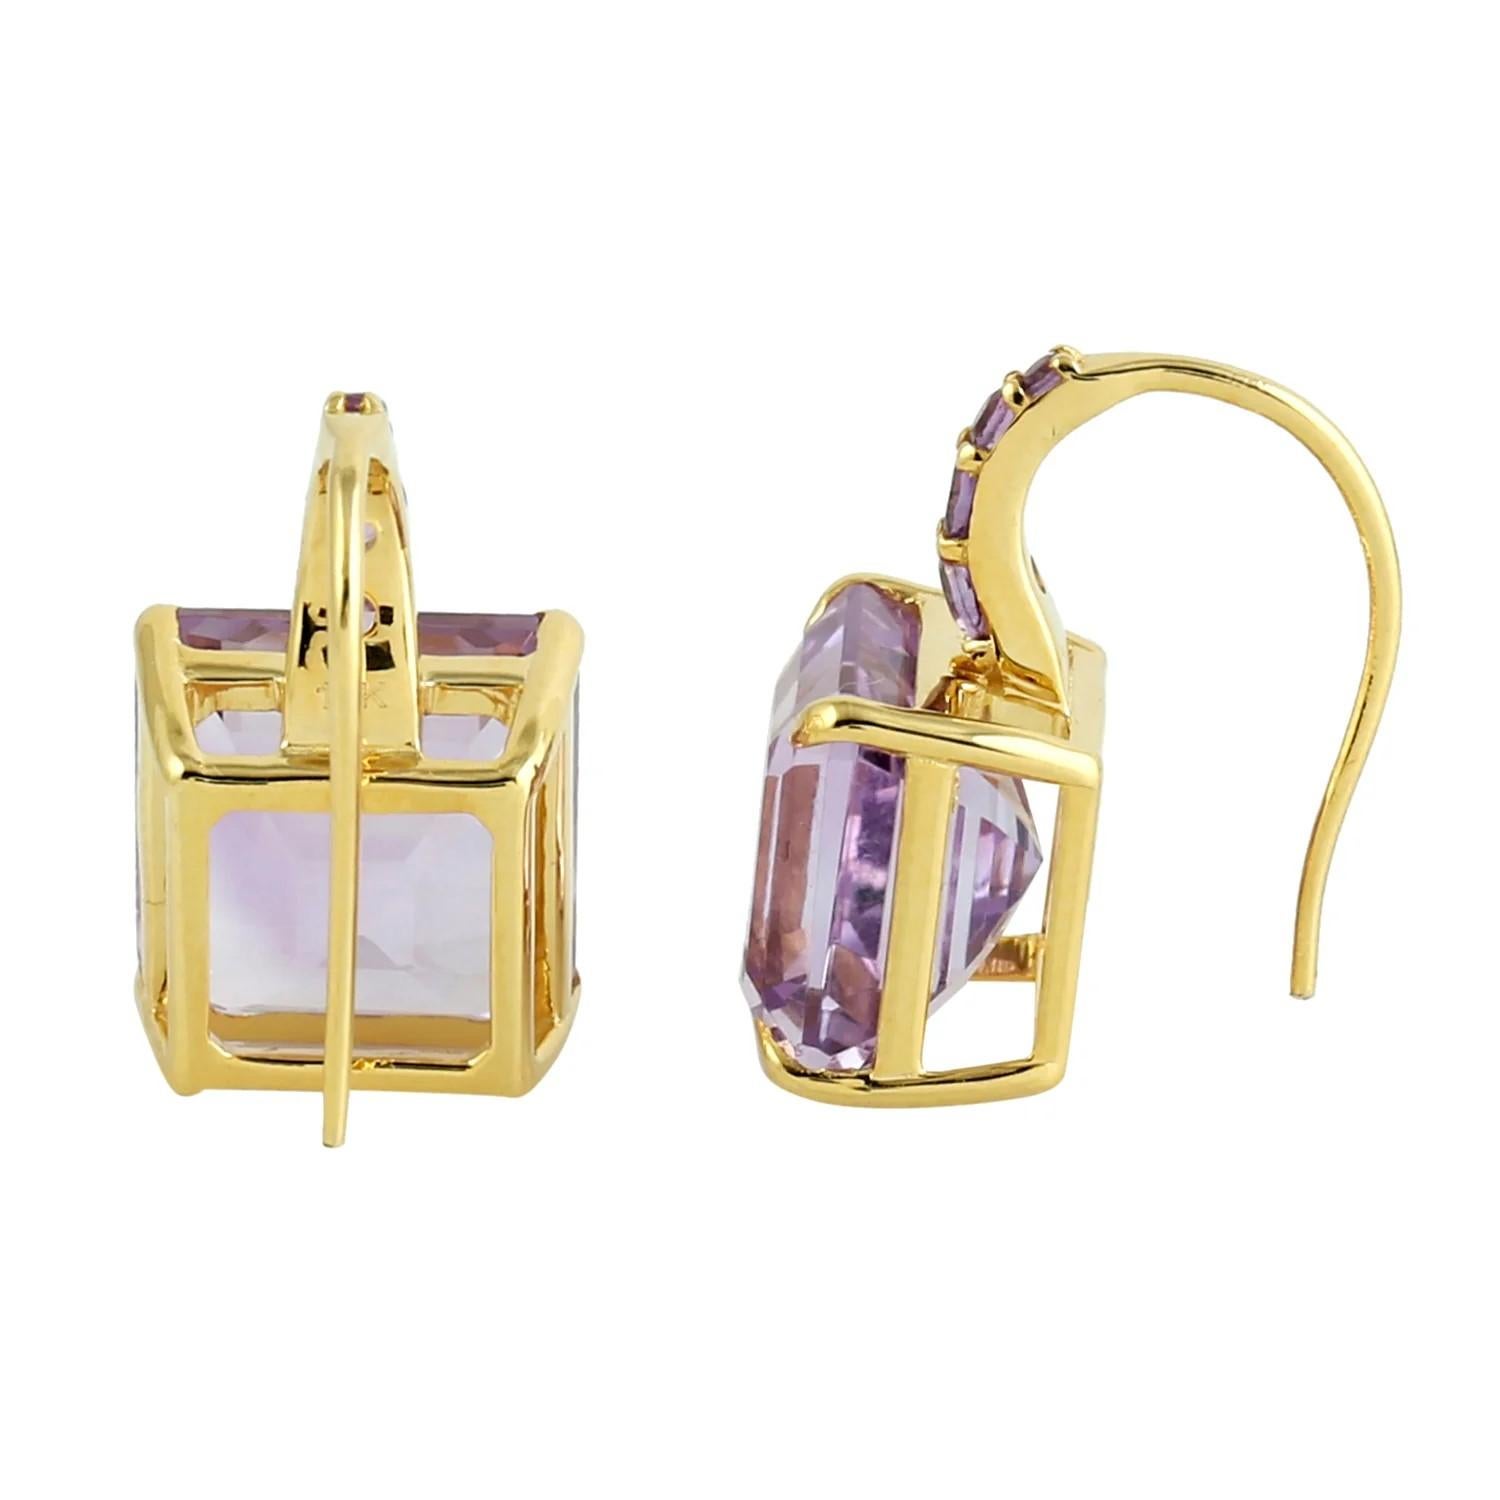 Cast in 14-karat gold. These beautiful earrings are set with 11.28 carats amethyst.

FOLLOW  MEGHNA JEWELS storefront to view the latest collection & exclusive pieces.  Meghna Jewels is proudly rated as a Top Seller on 1stdibs with 5 star customer